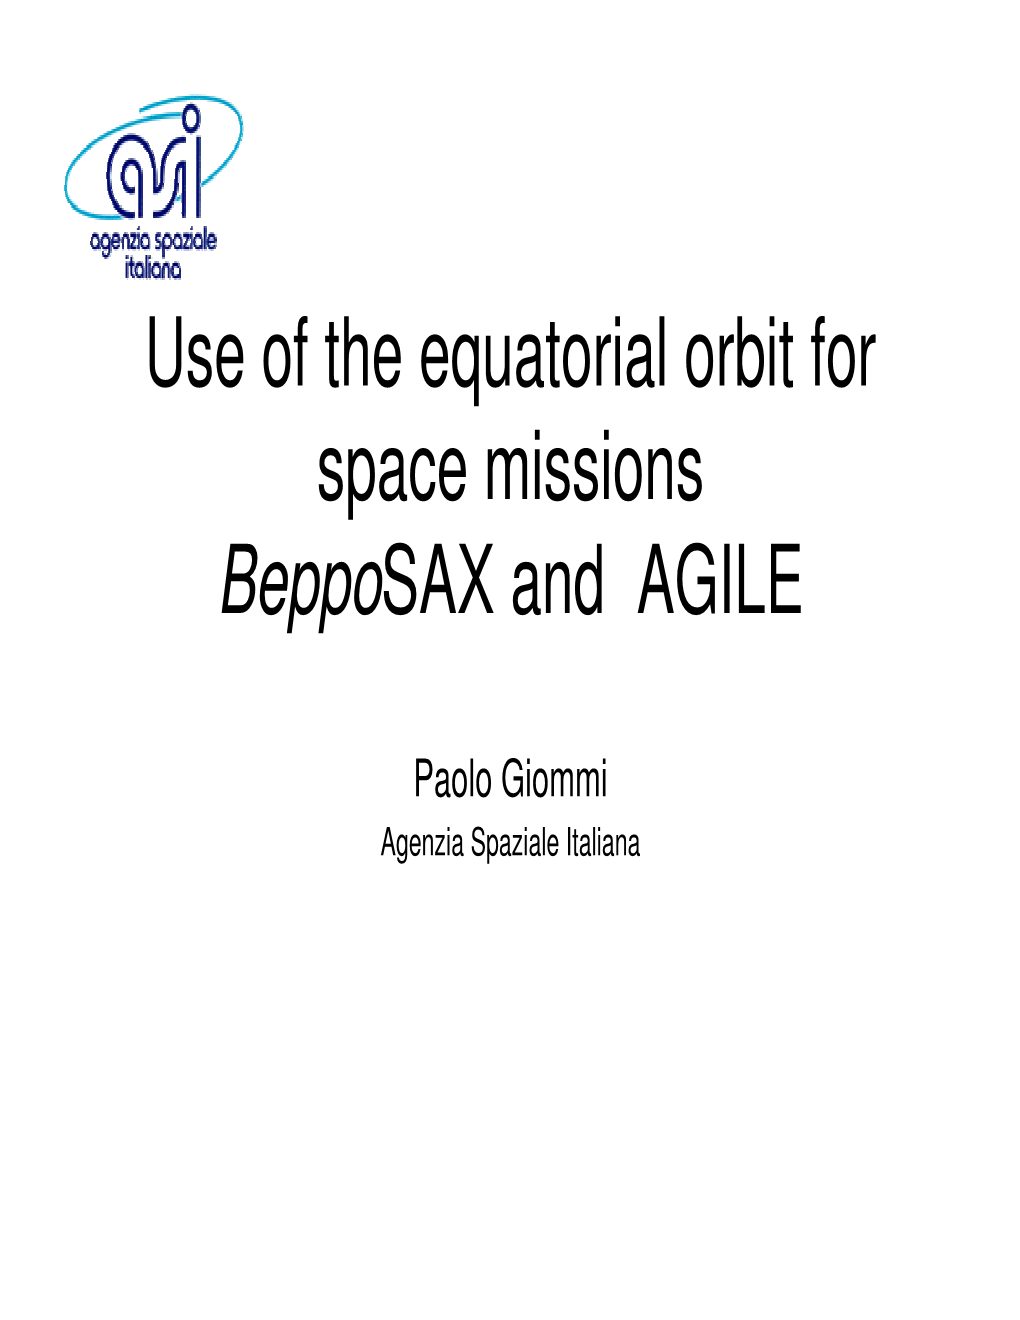 Use of the Equatorial Orbit for Space Missions Bepposax and AGILE